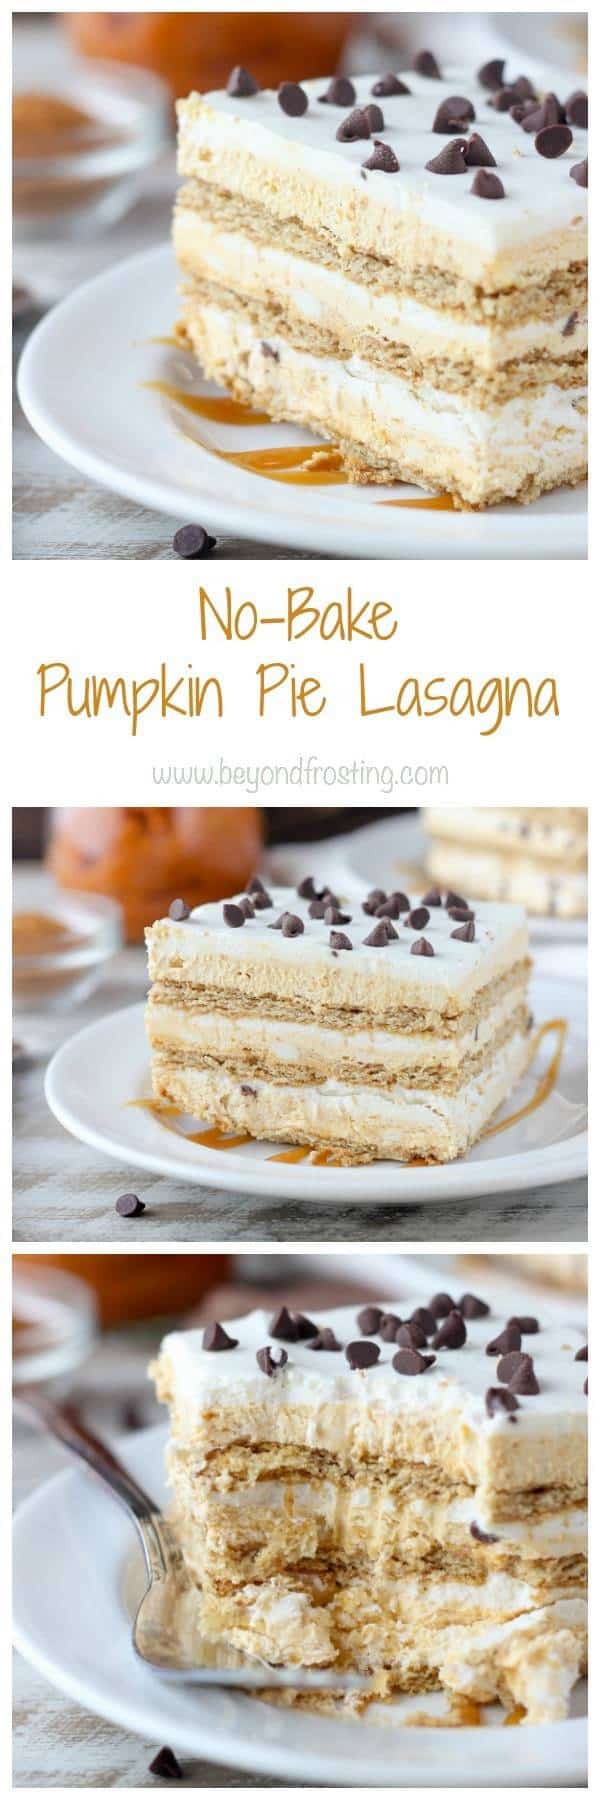 If you’re looking for a quick holiday treat, try this no-bake Pumpkin Pie Lasagna. Layers of pumpkin mousse, whipped cream and graham crackers make this icebox cake the perfect fall dessert. 